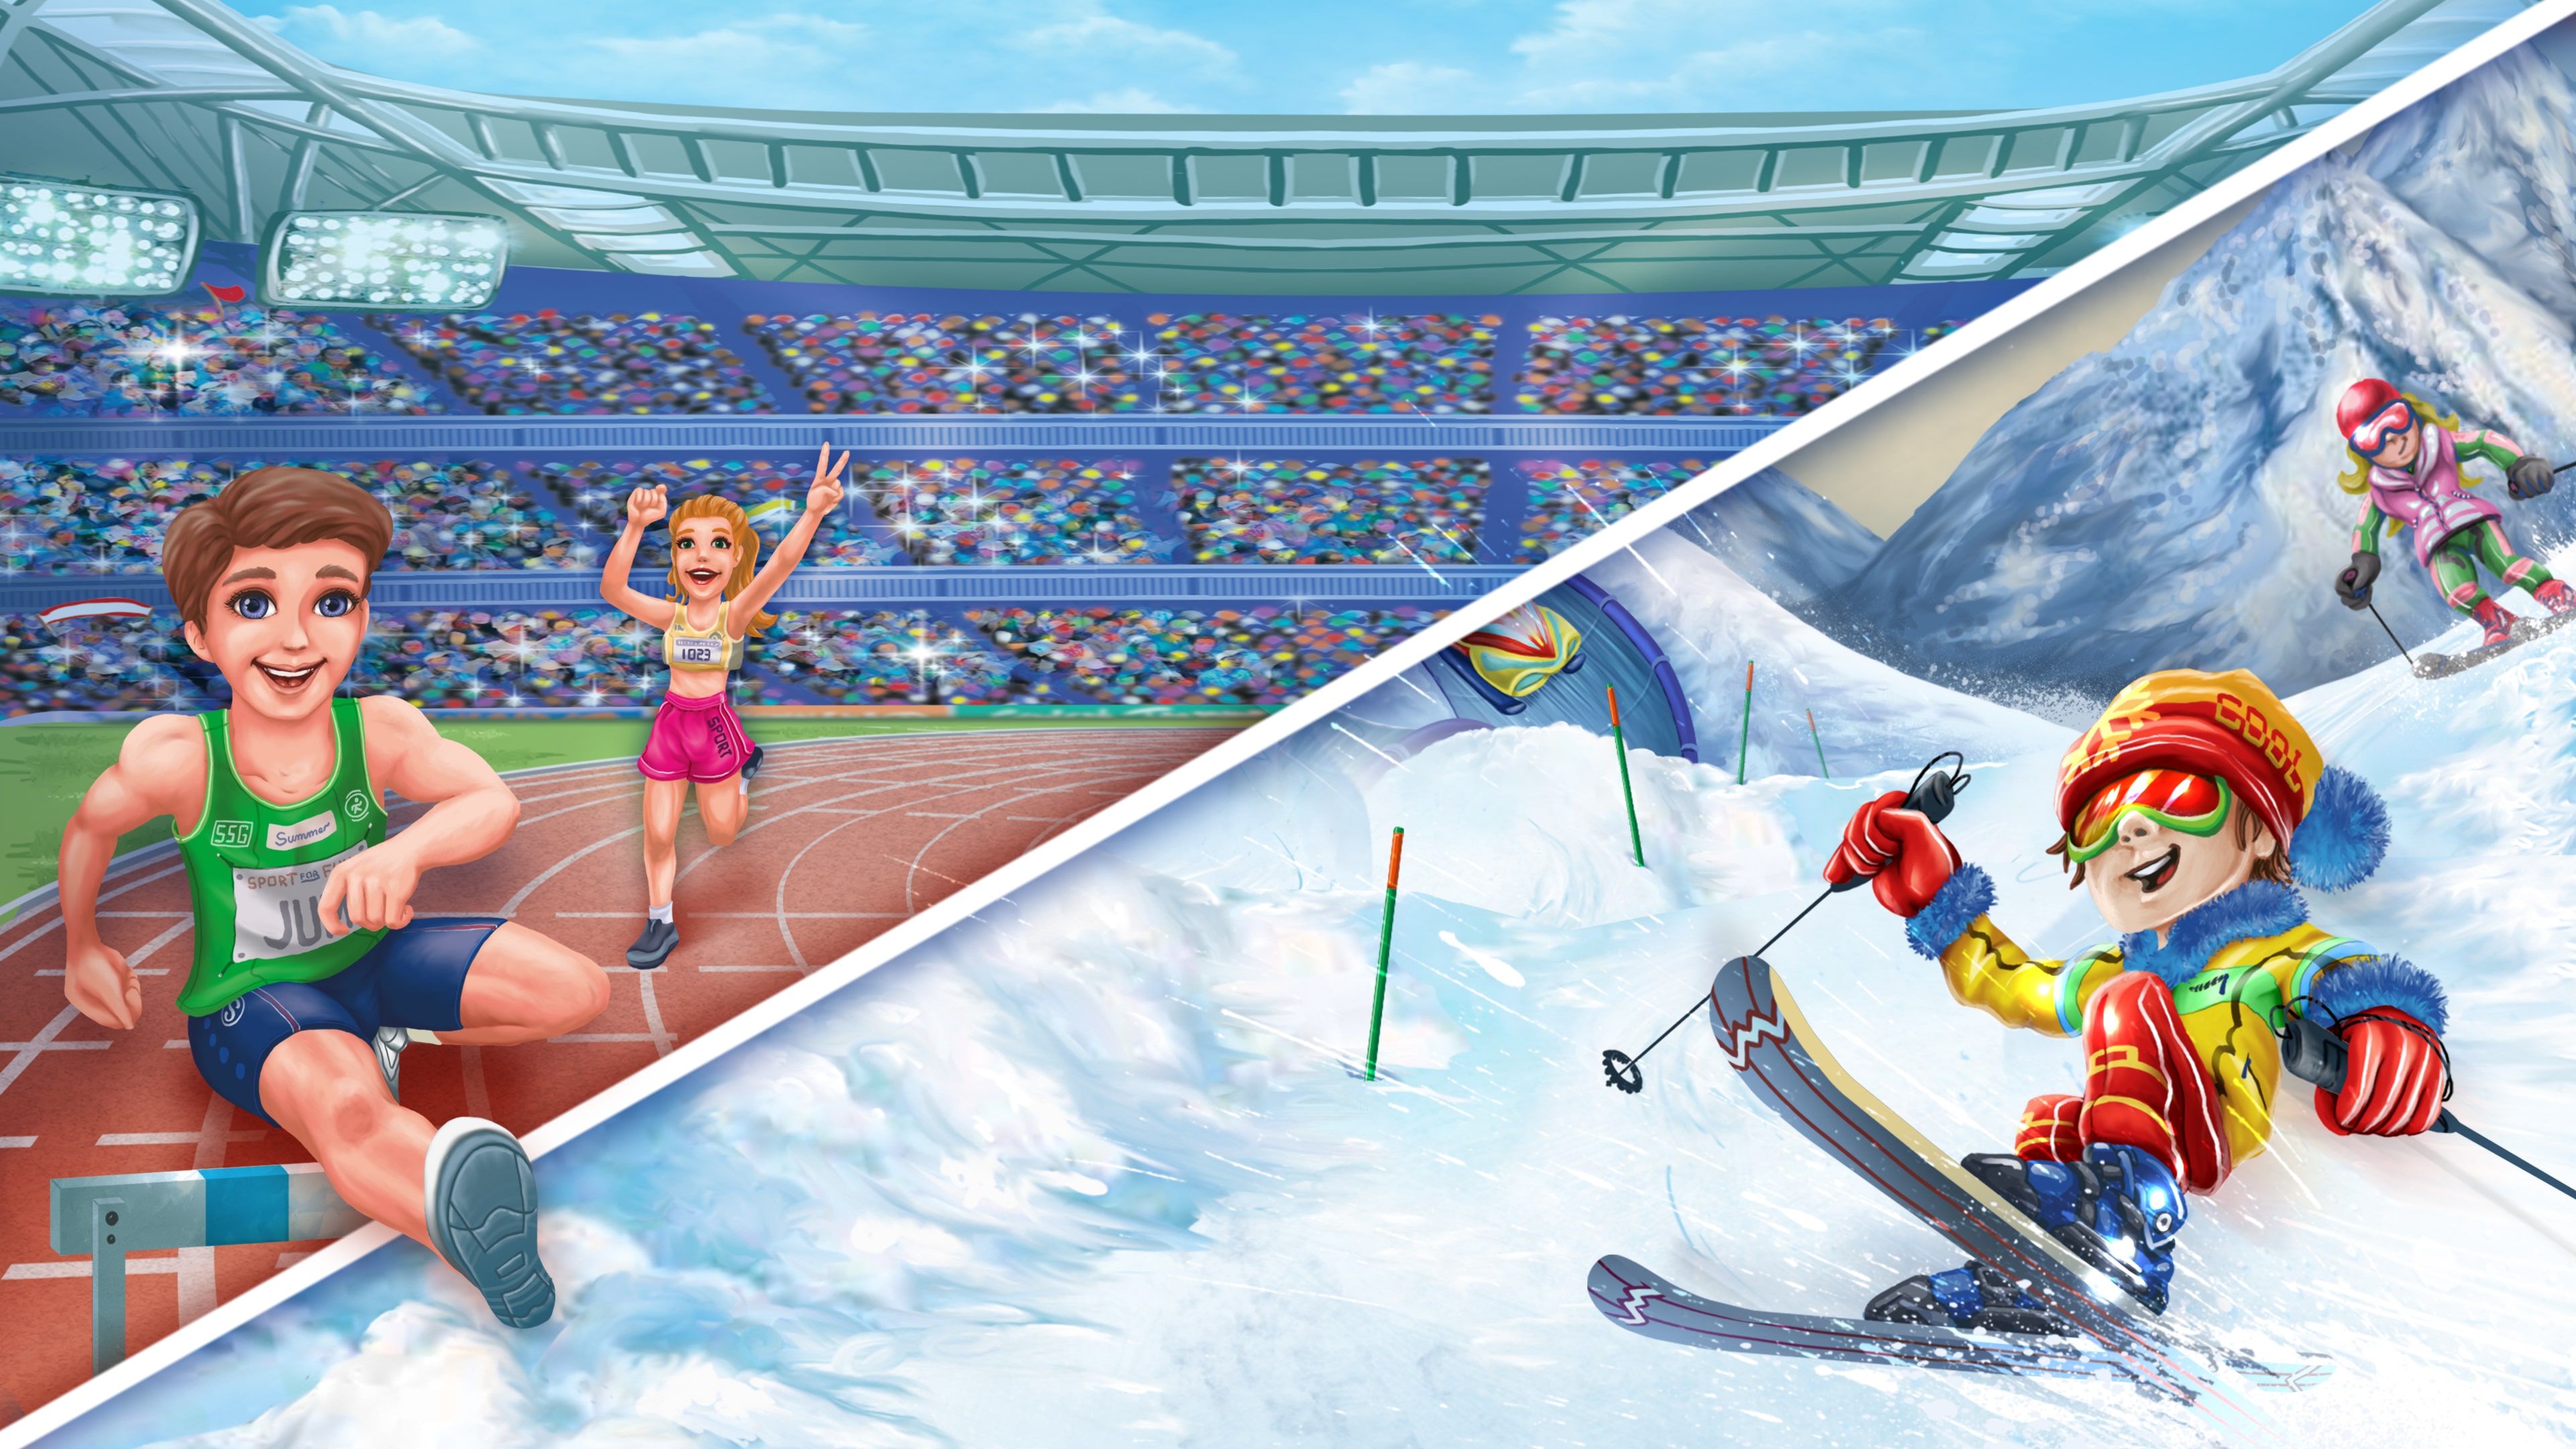 Summer and Winter Sports Games Bundle - 4K Edition (English)